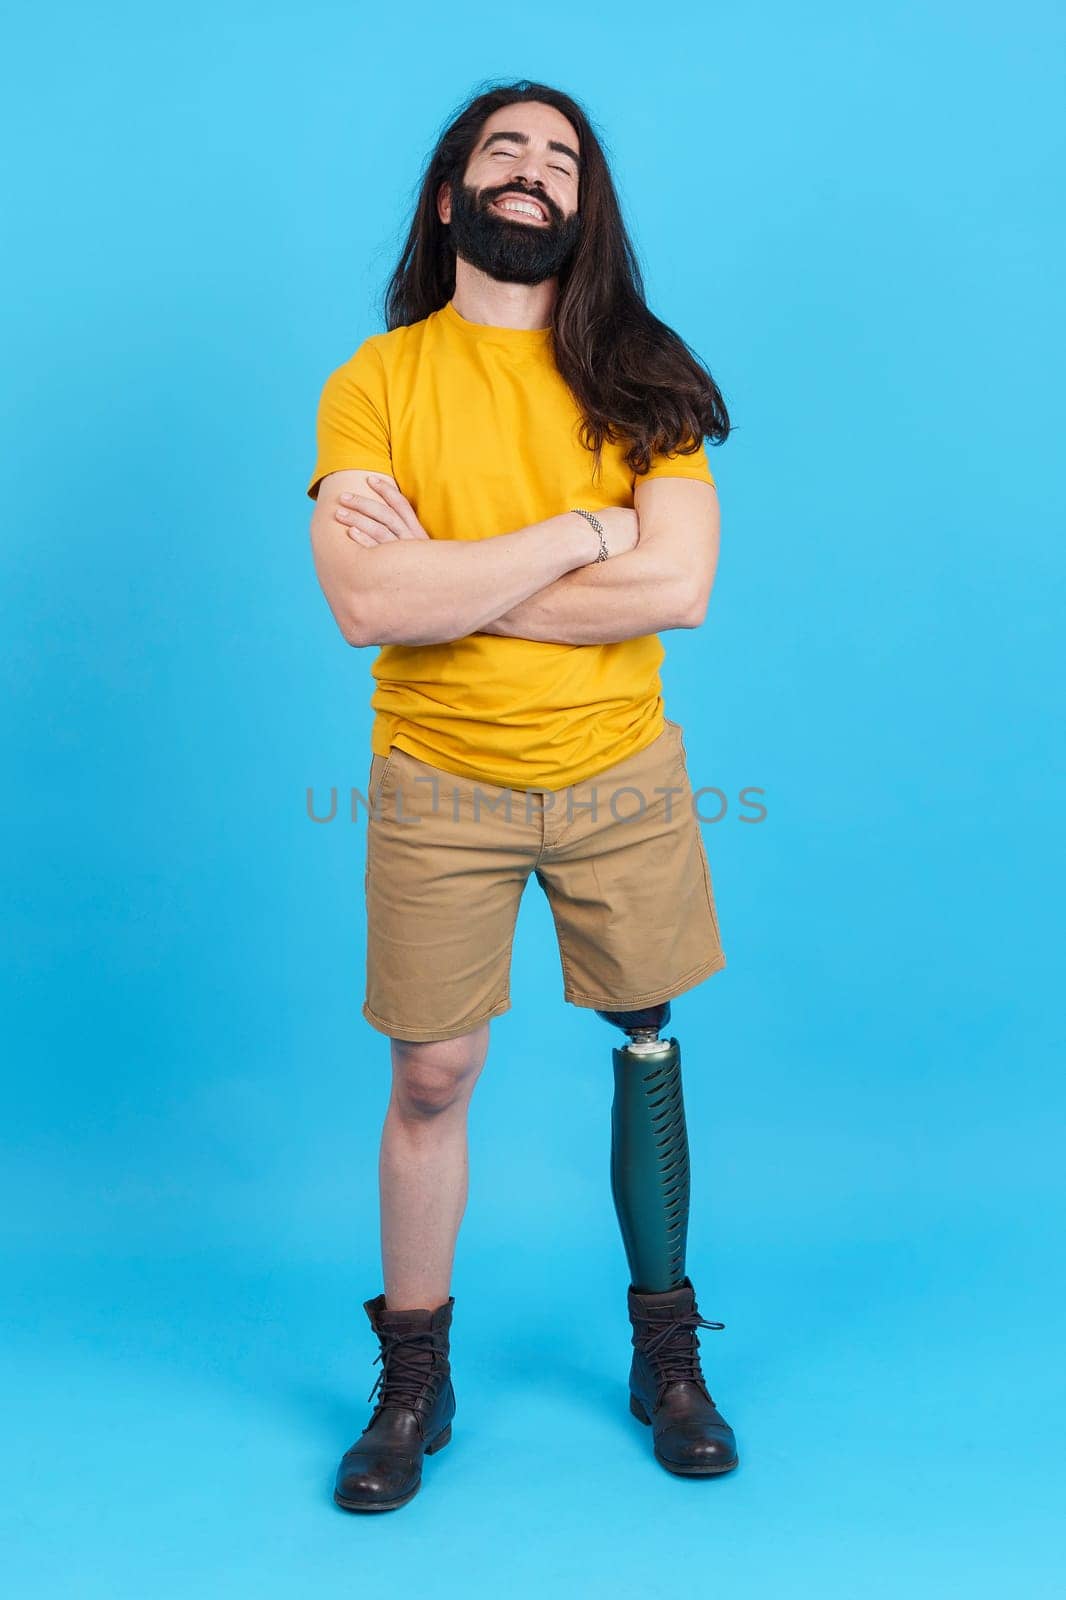 Vertical studio portrait with blue background of a cool man with a leg prosthesis standing with arms crossed